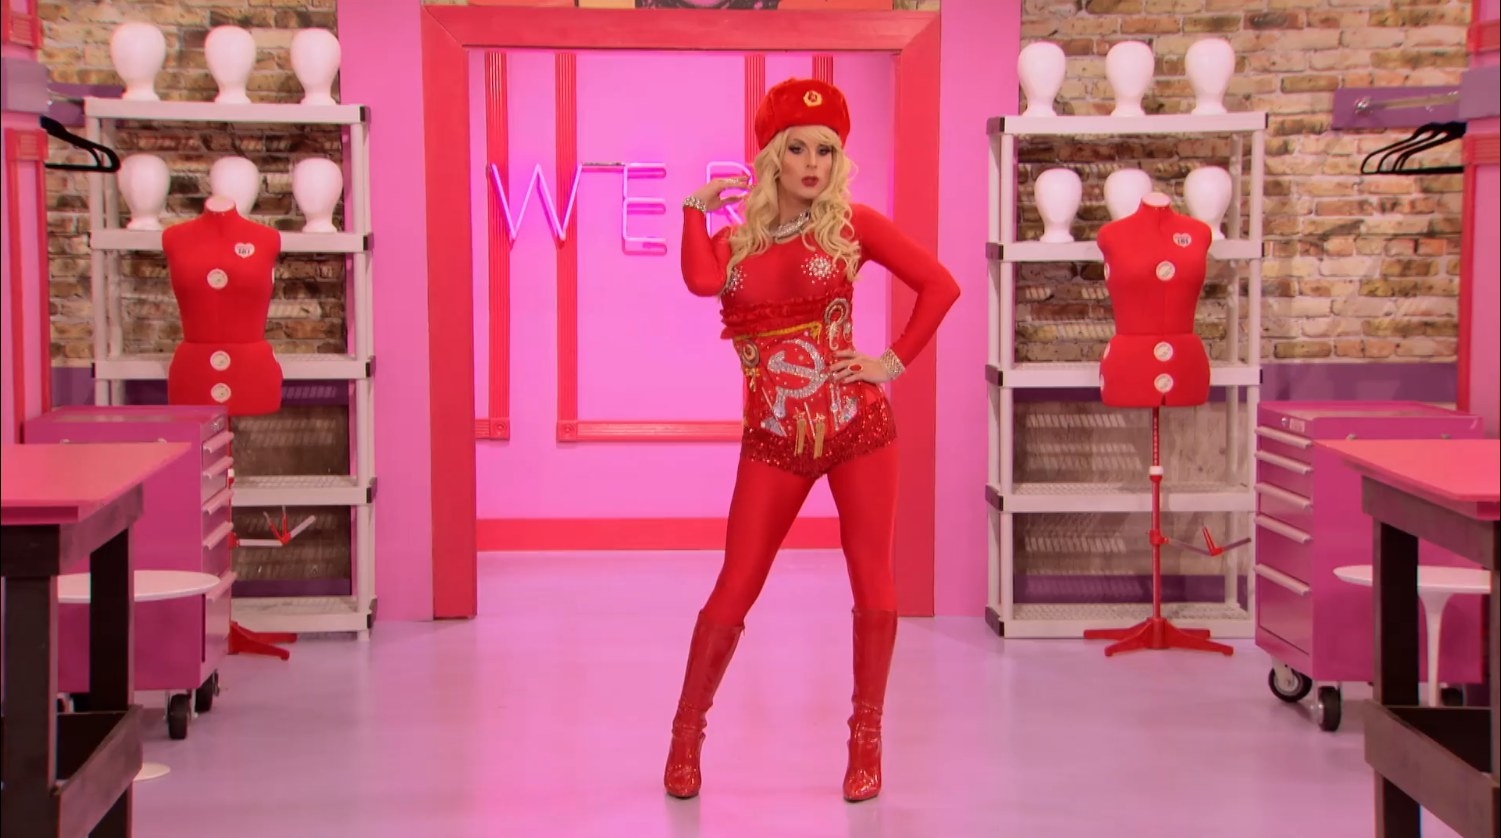 Drag queen Katya wearing a red bodysuit and corset styled with Russian insignias, and matching headpiece